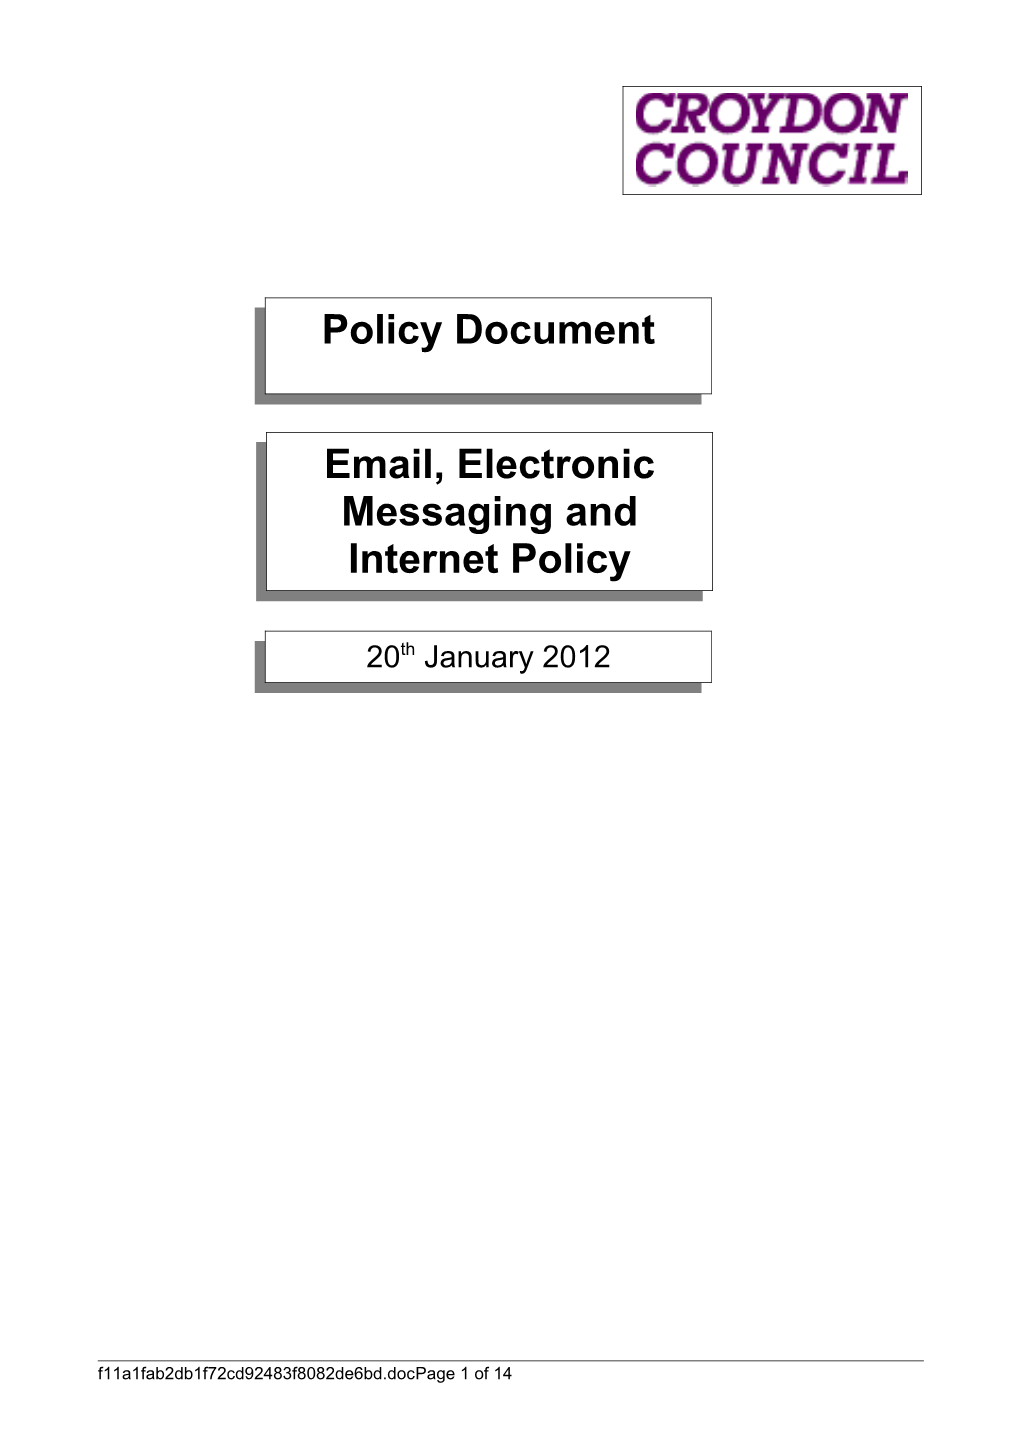 Use of E-Mail and Internet Policy